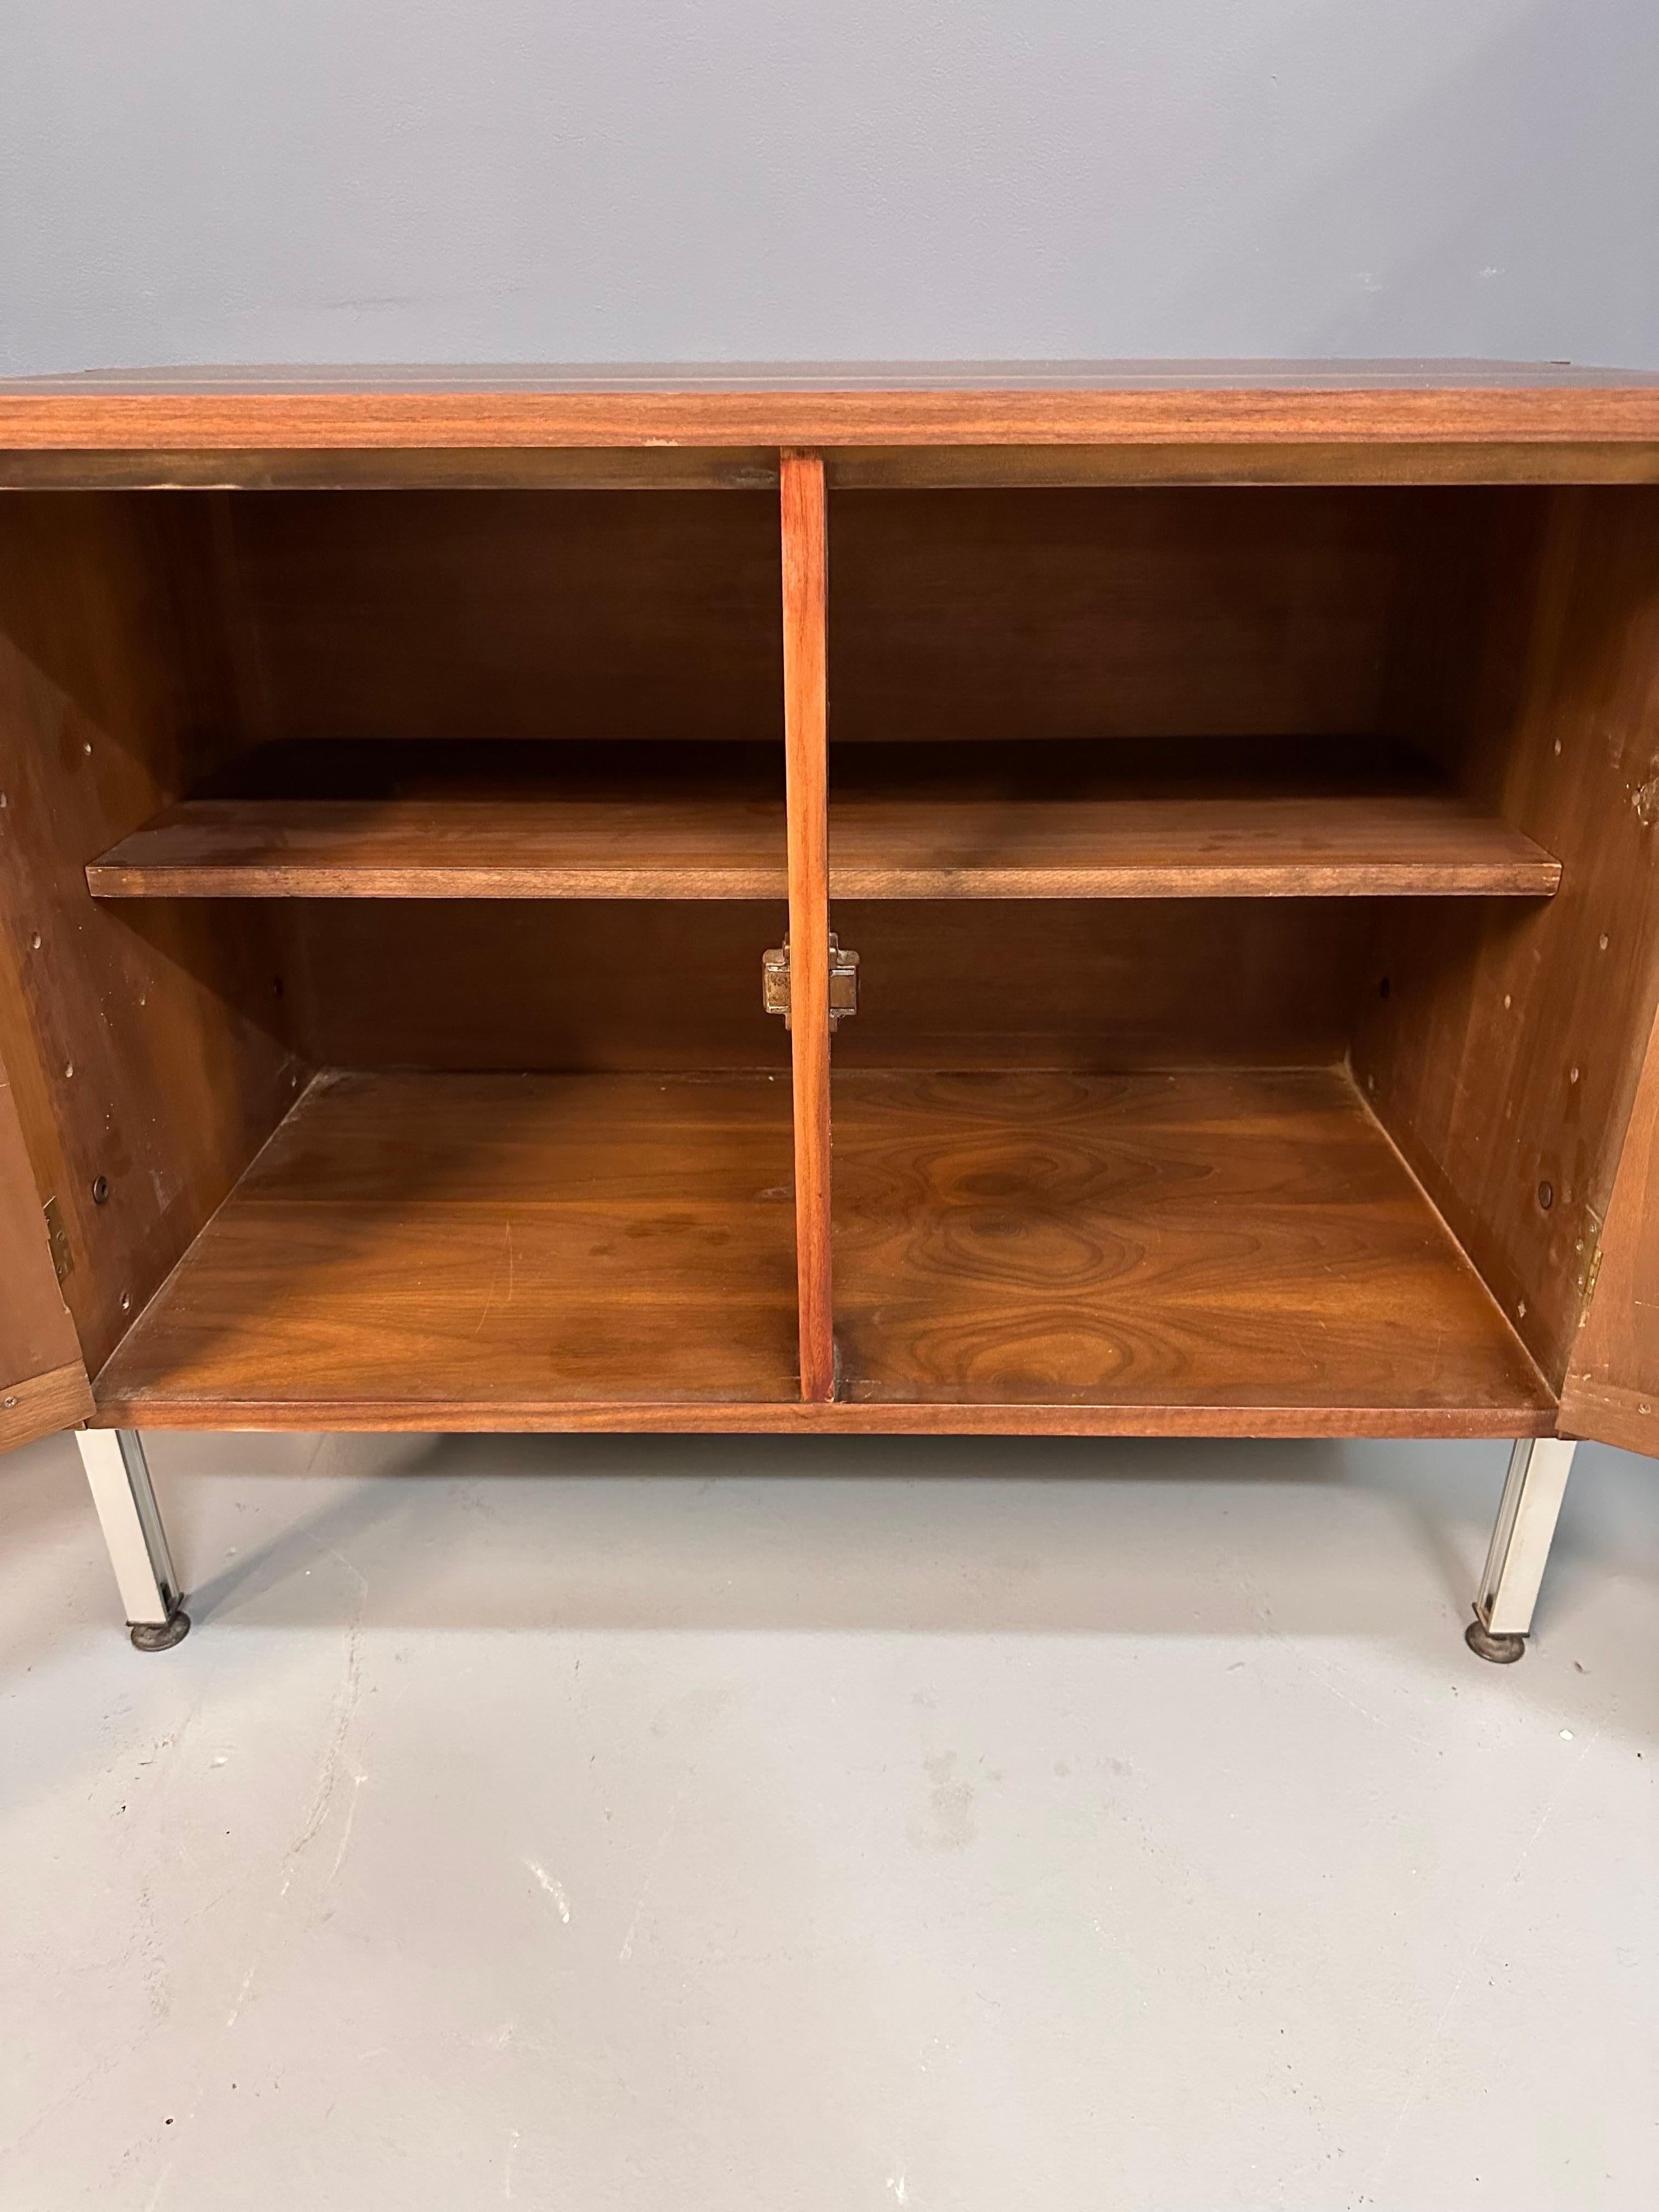 Pair of Midcentury Walnut Cabinets with Exposed Aluminum Legs Style of Wormley 3